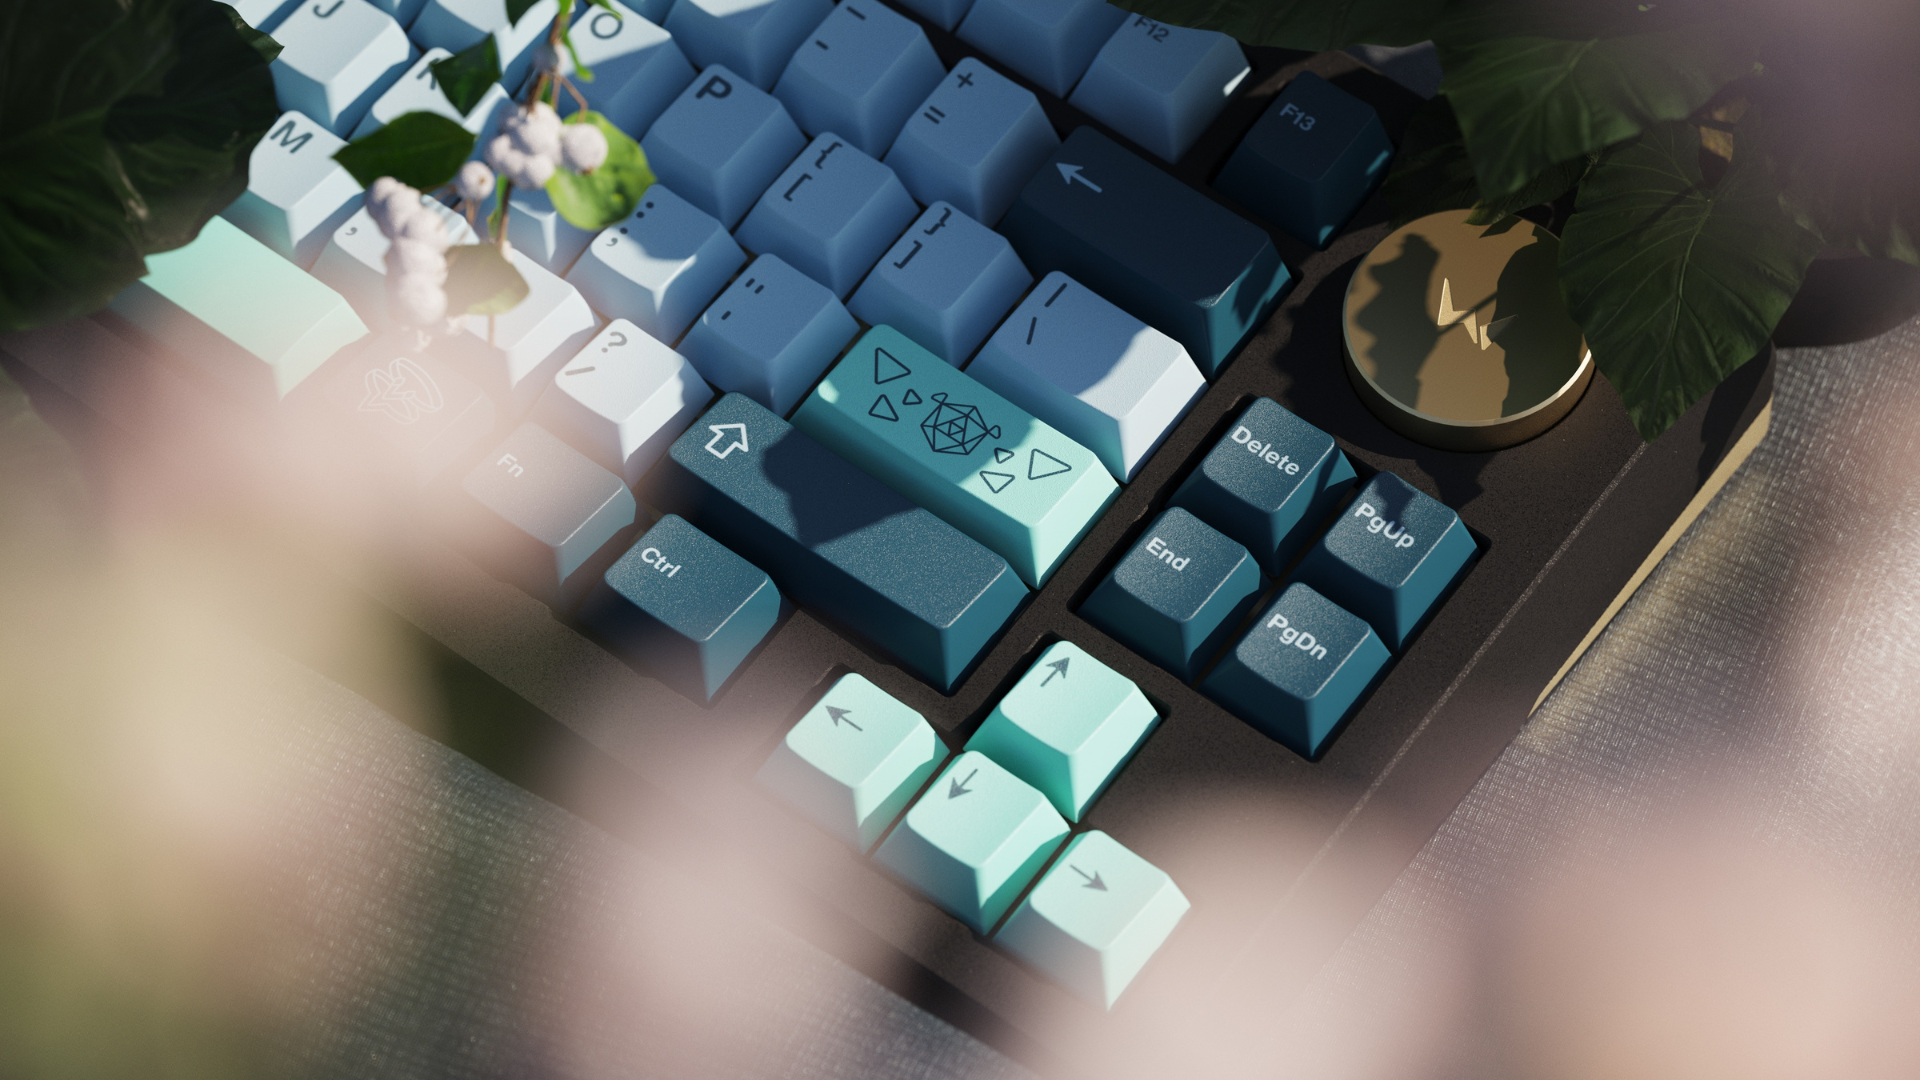 WS Entwined Flowers Keycaps [Group Buy]